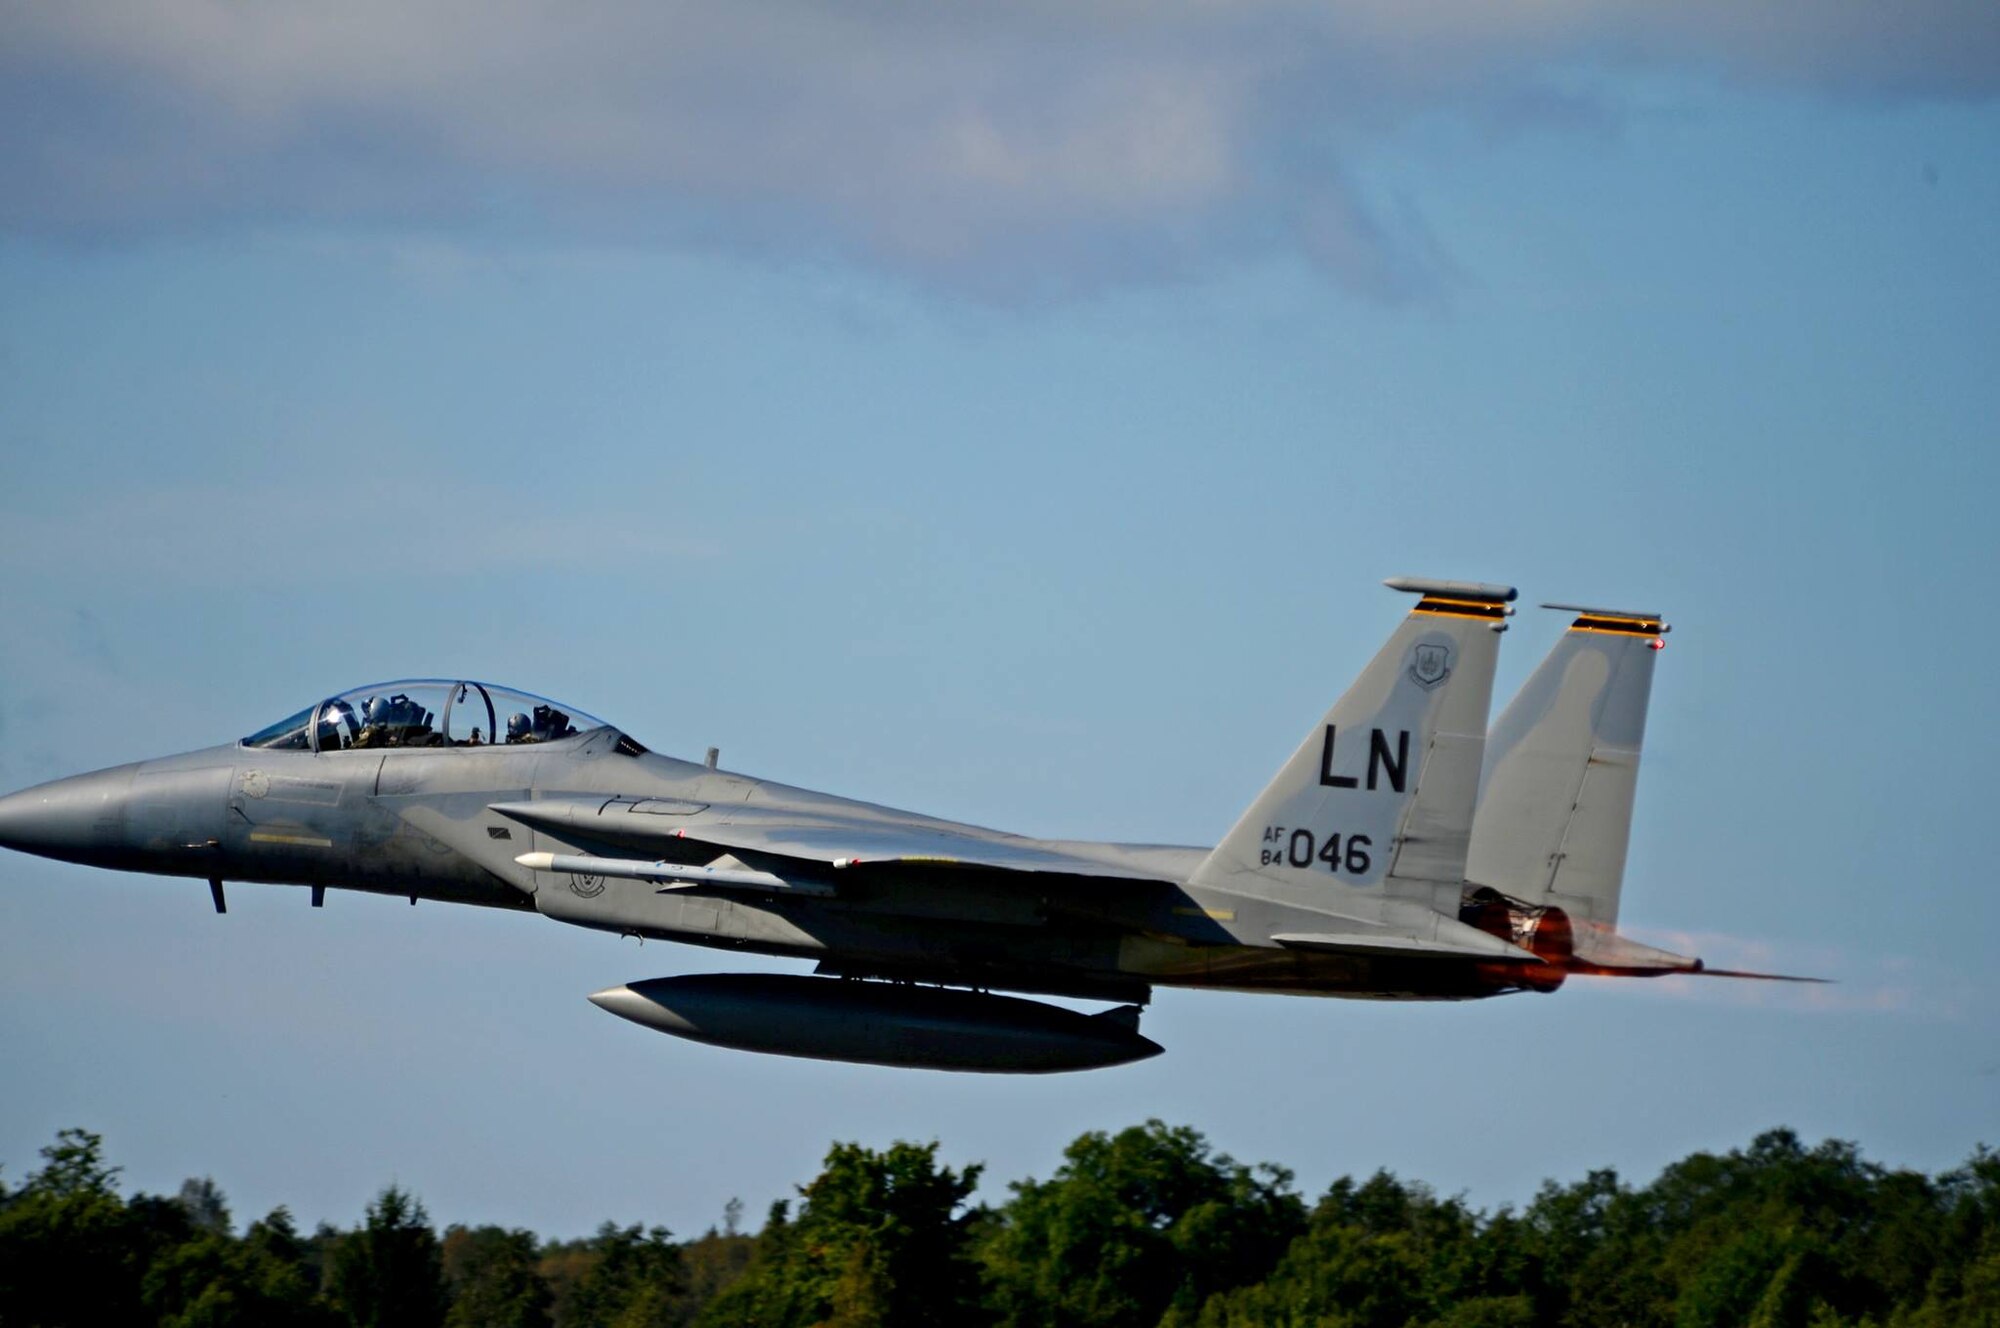 A U.S. Air Force 493rd Fighter Squadron F-15D Eagle departs Ämari Air Base, Estonia, Aug. 24, 2016. Martha Raddatz, ABC News chief global affairs correspondent, took a familiarization flight in the back seat of the aircraft to become familiar with the aircraft’s capabilities during the squadron’s multilateral flying training deployment. The 493rd Fighter Squadron, assigned to Royal Air Force Lakenheath, England, and the 194th Expeditionary Fighter Squadron, assigned to the California Air National Guard in Fresno, are participating in the FTD with 16 F-15C Eagle aircraft alongside national allies in focus of maintaining security and building partnership capacity with Estonia. (U.S. Air Force photo by Senior Airman Erin Trower/Released) 